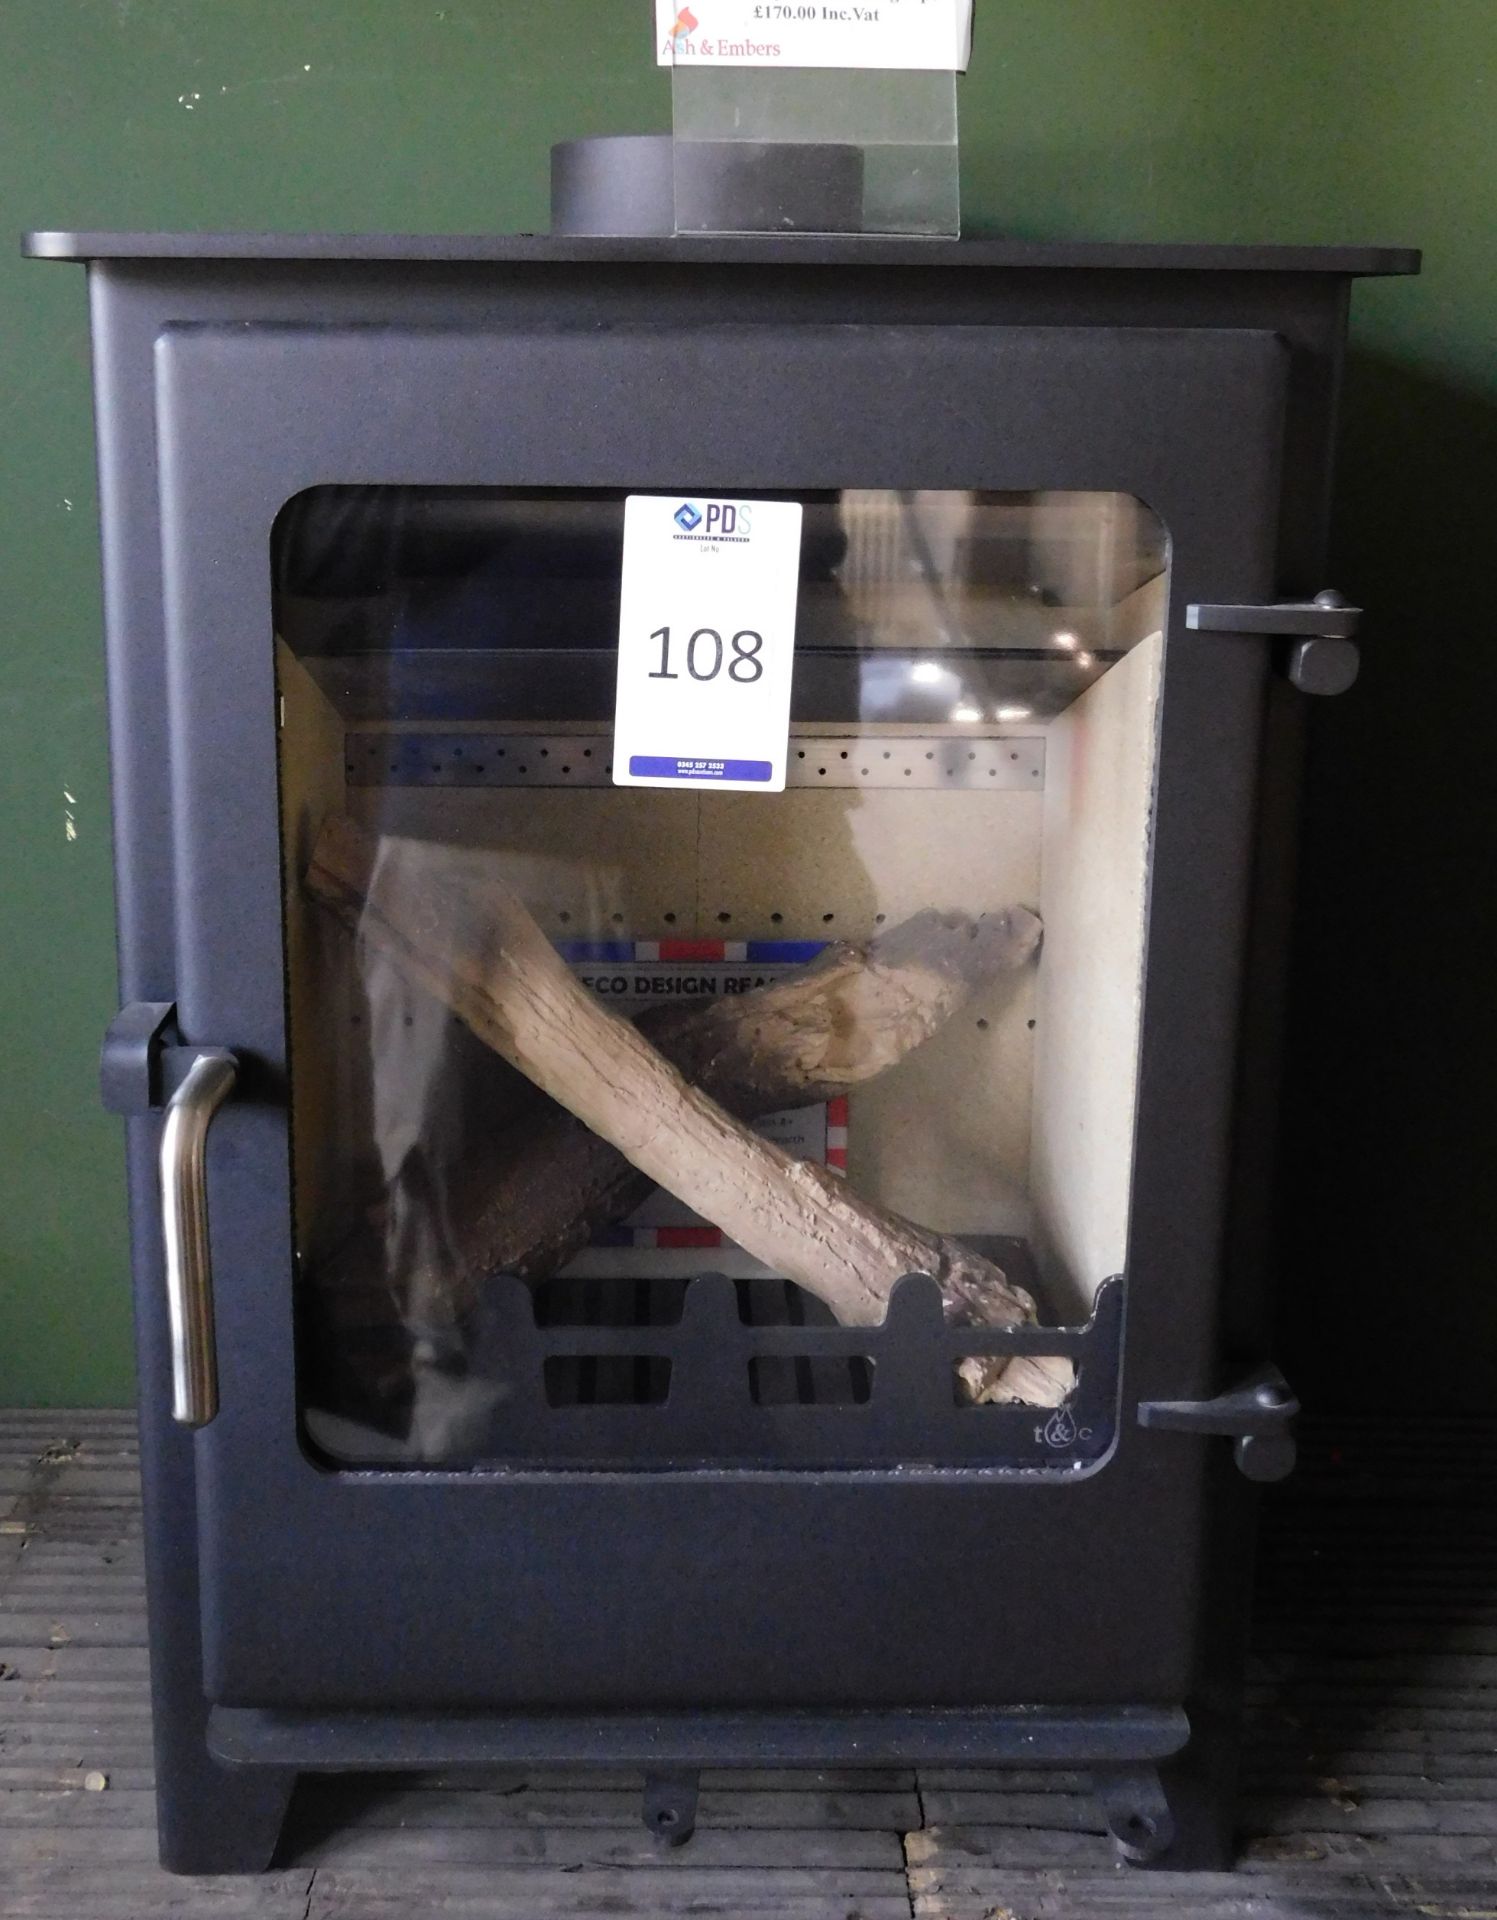 Ex-Display Town & Country “Cropton” 5kw Stove (Where the company’s description/price information